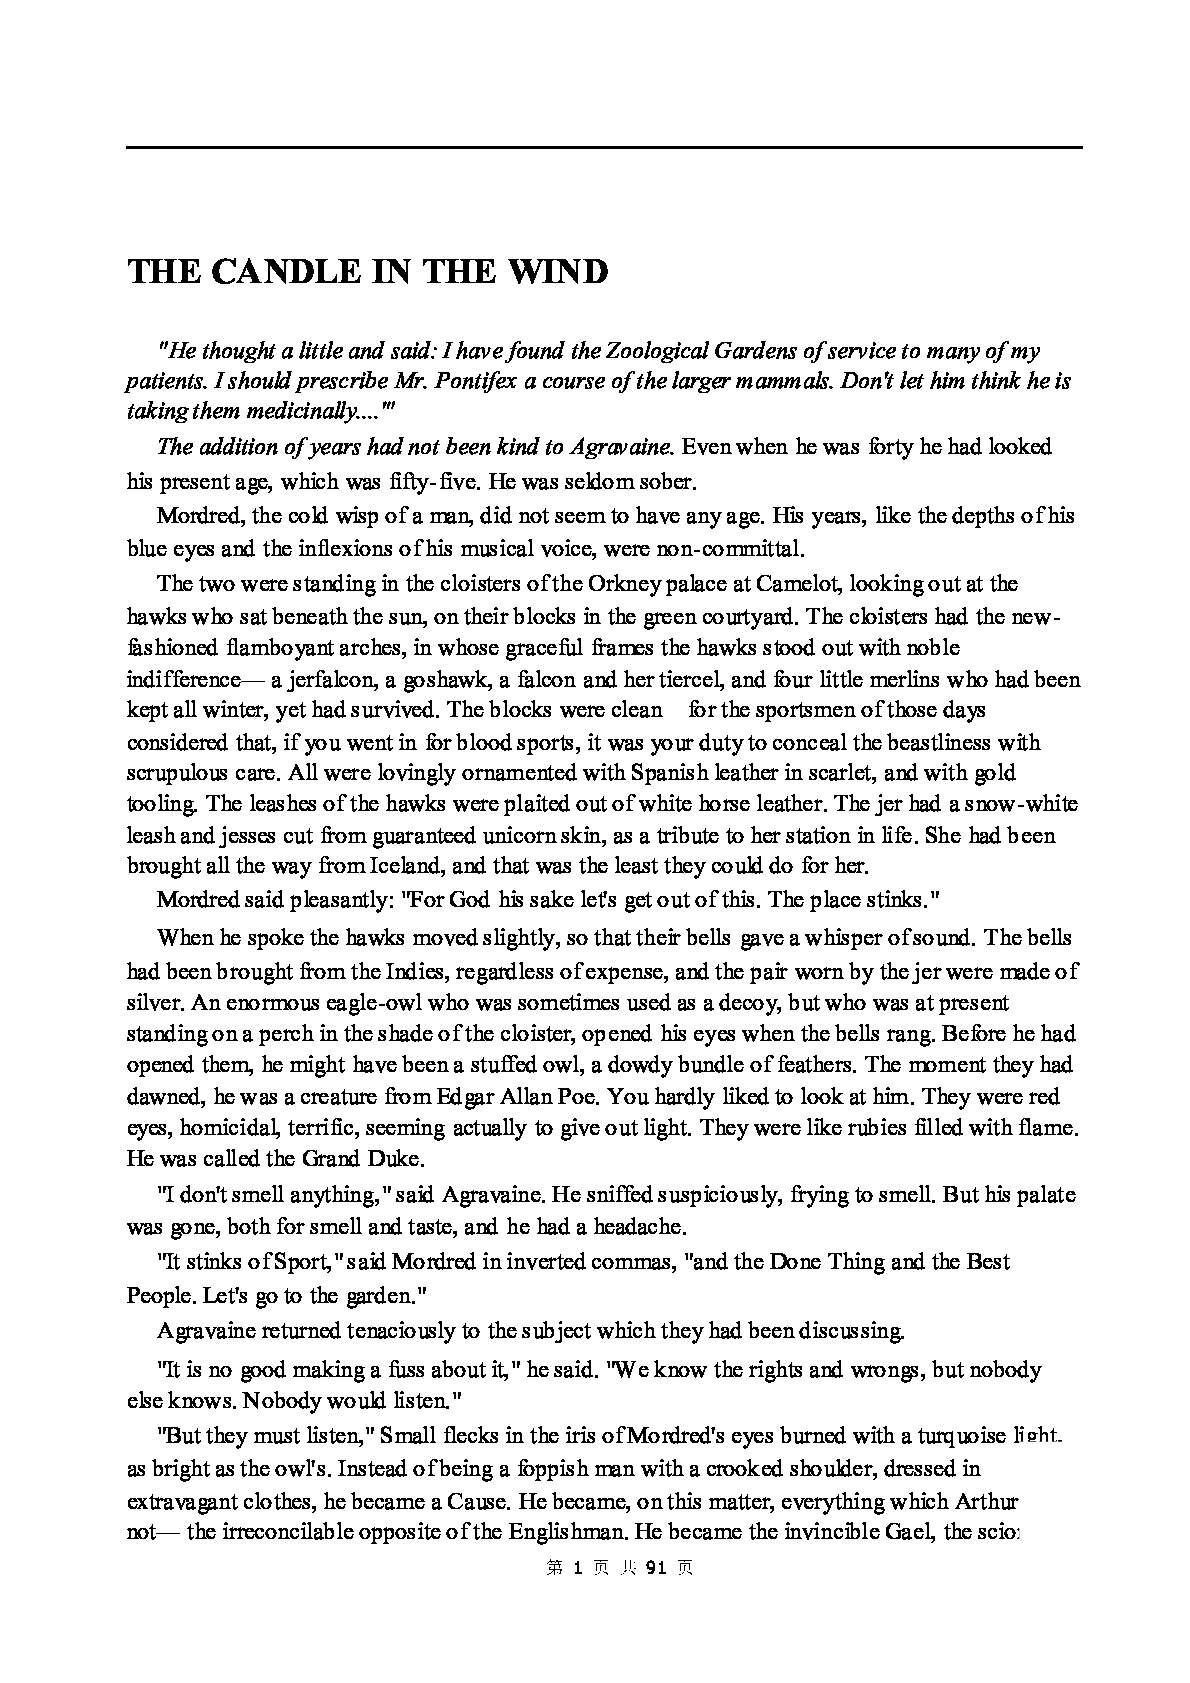 4.The Candle in the Wind